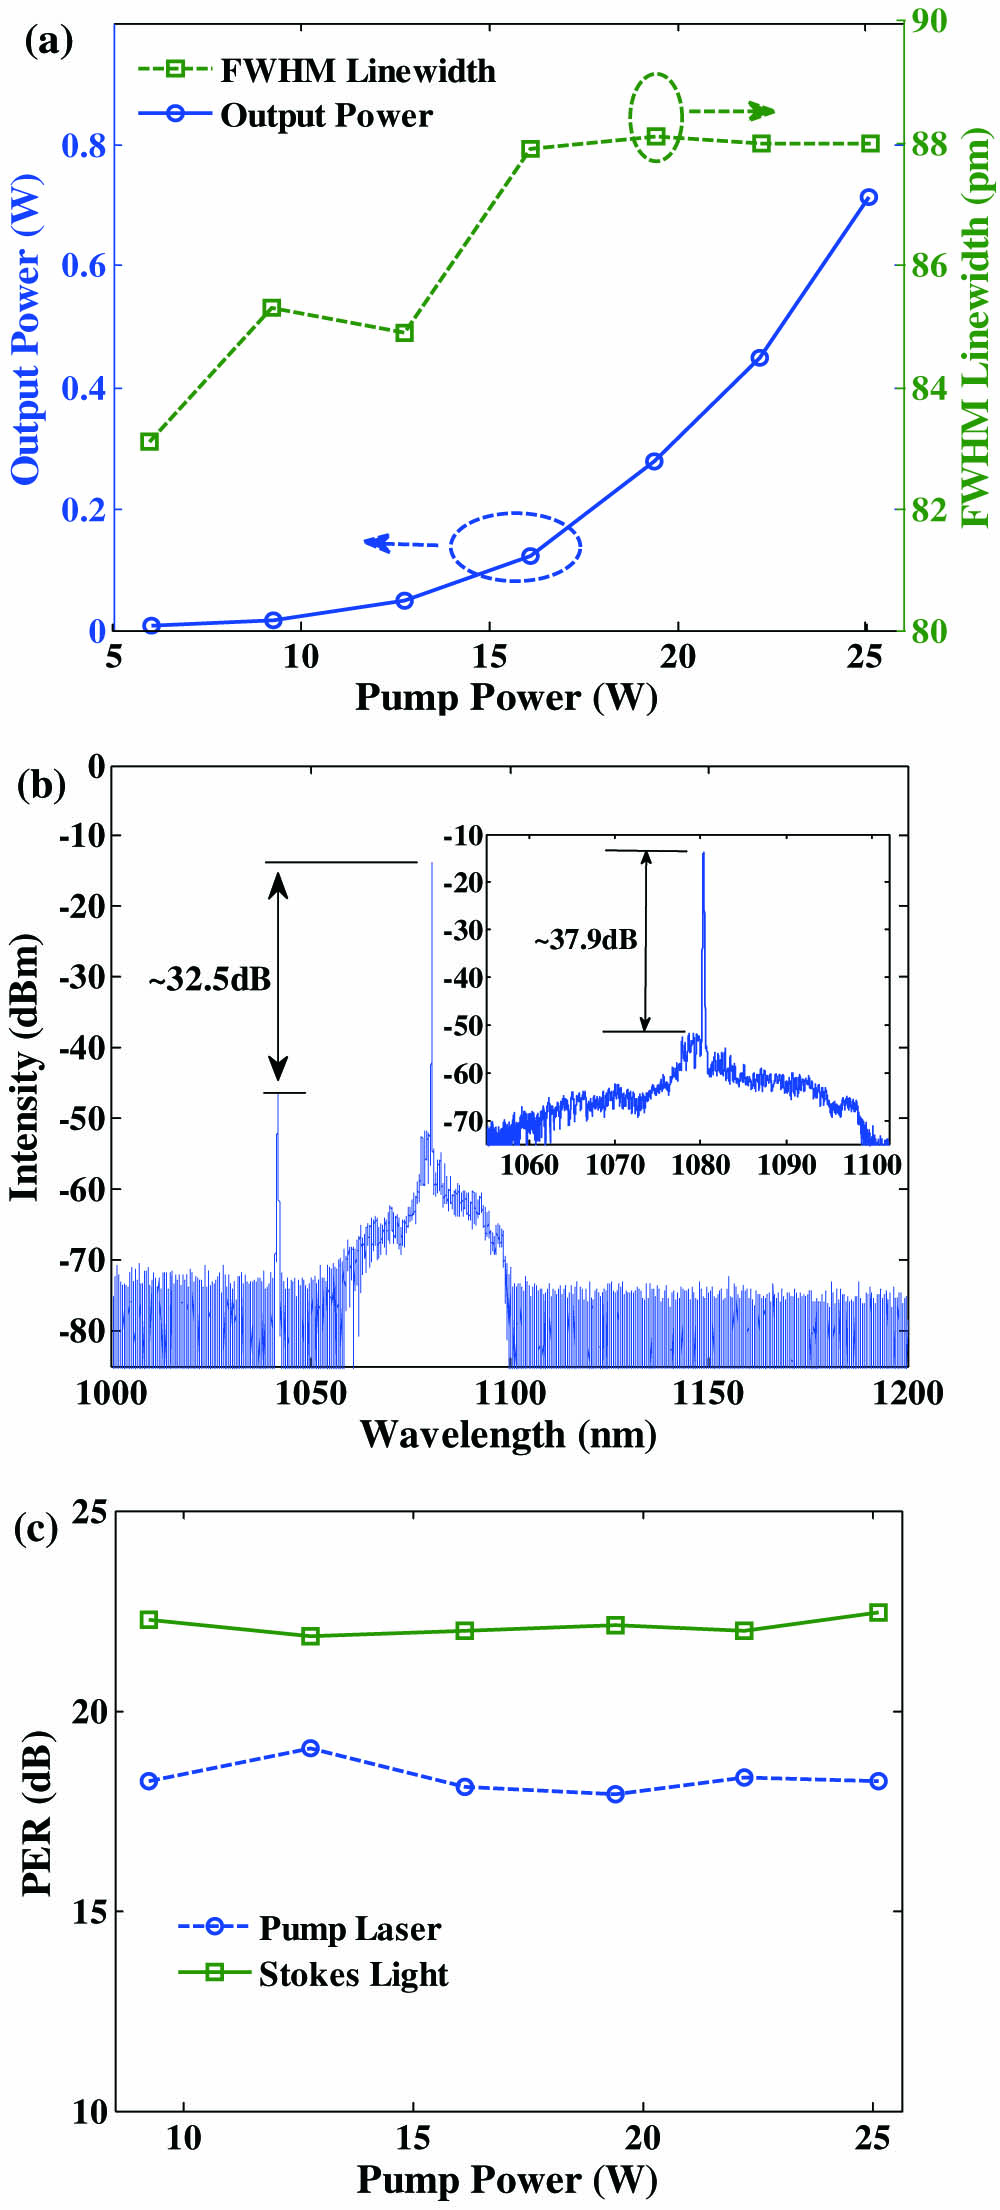 Output characteristics of the linearly polarized narrow-linewidth seed. (a) Output power and FWHM linewidth as functions of pump power, (b) output spectrum at the maximum power level, (c) evolution of the PERs of the pump laser and random laser as functions of pump power.